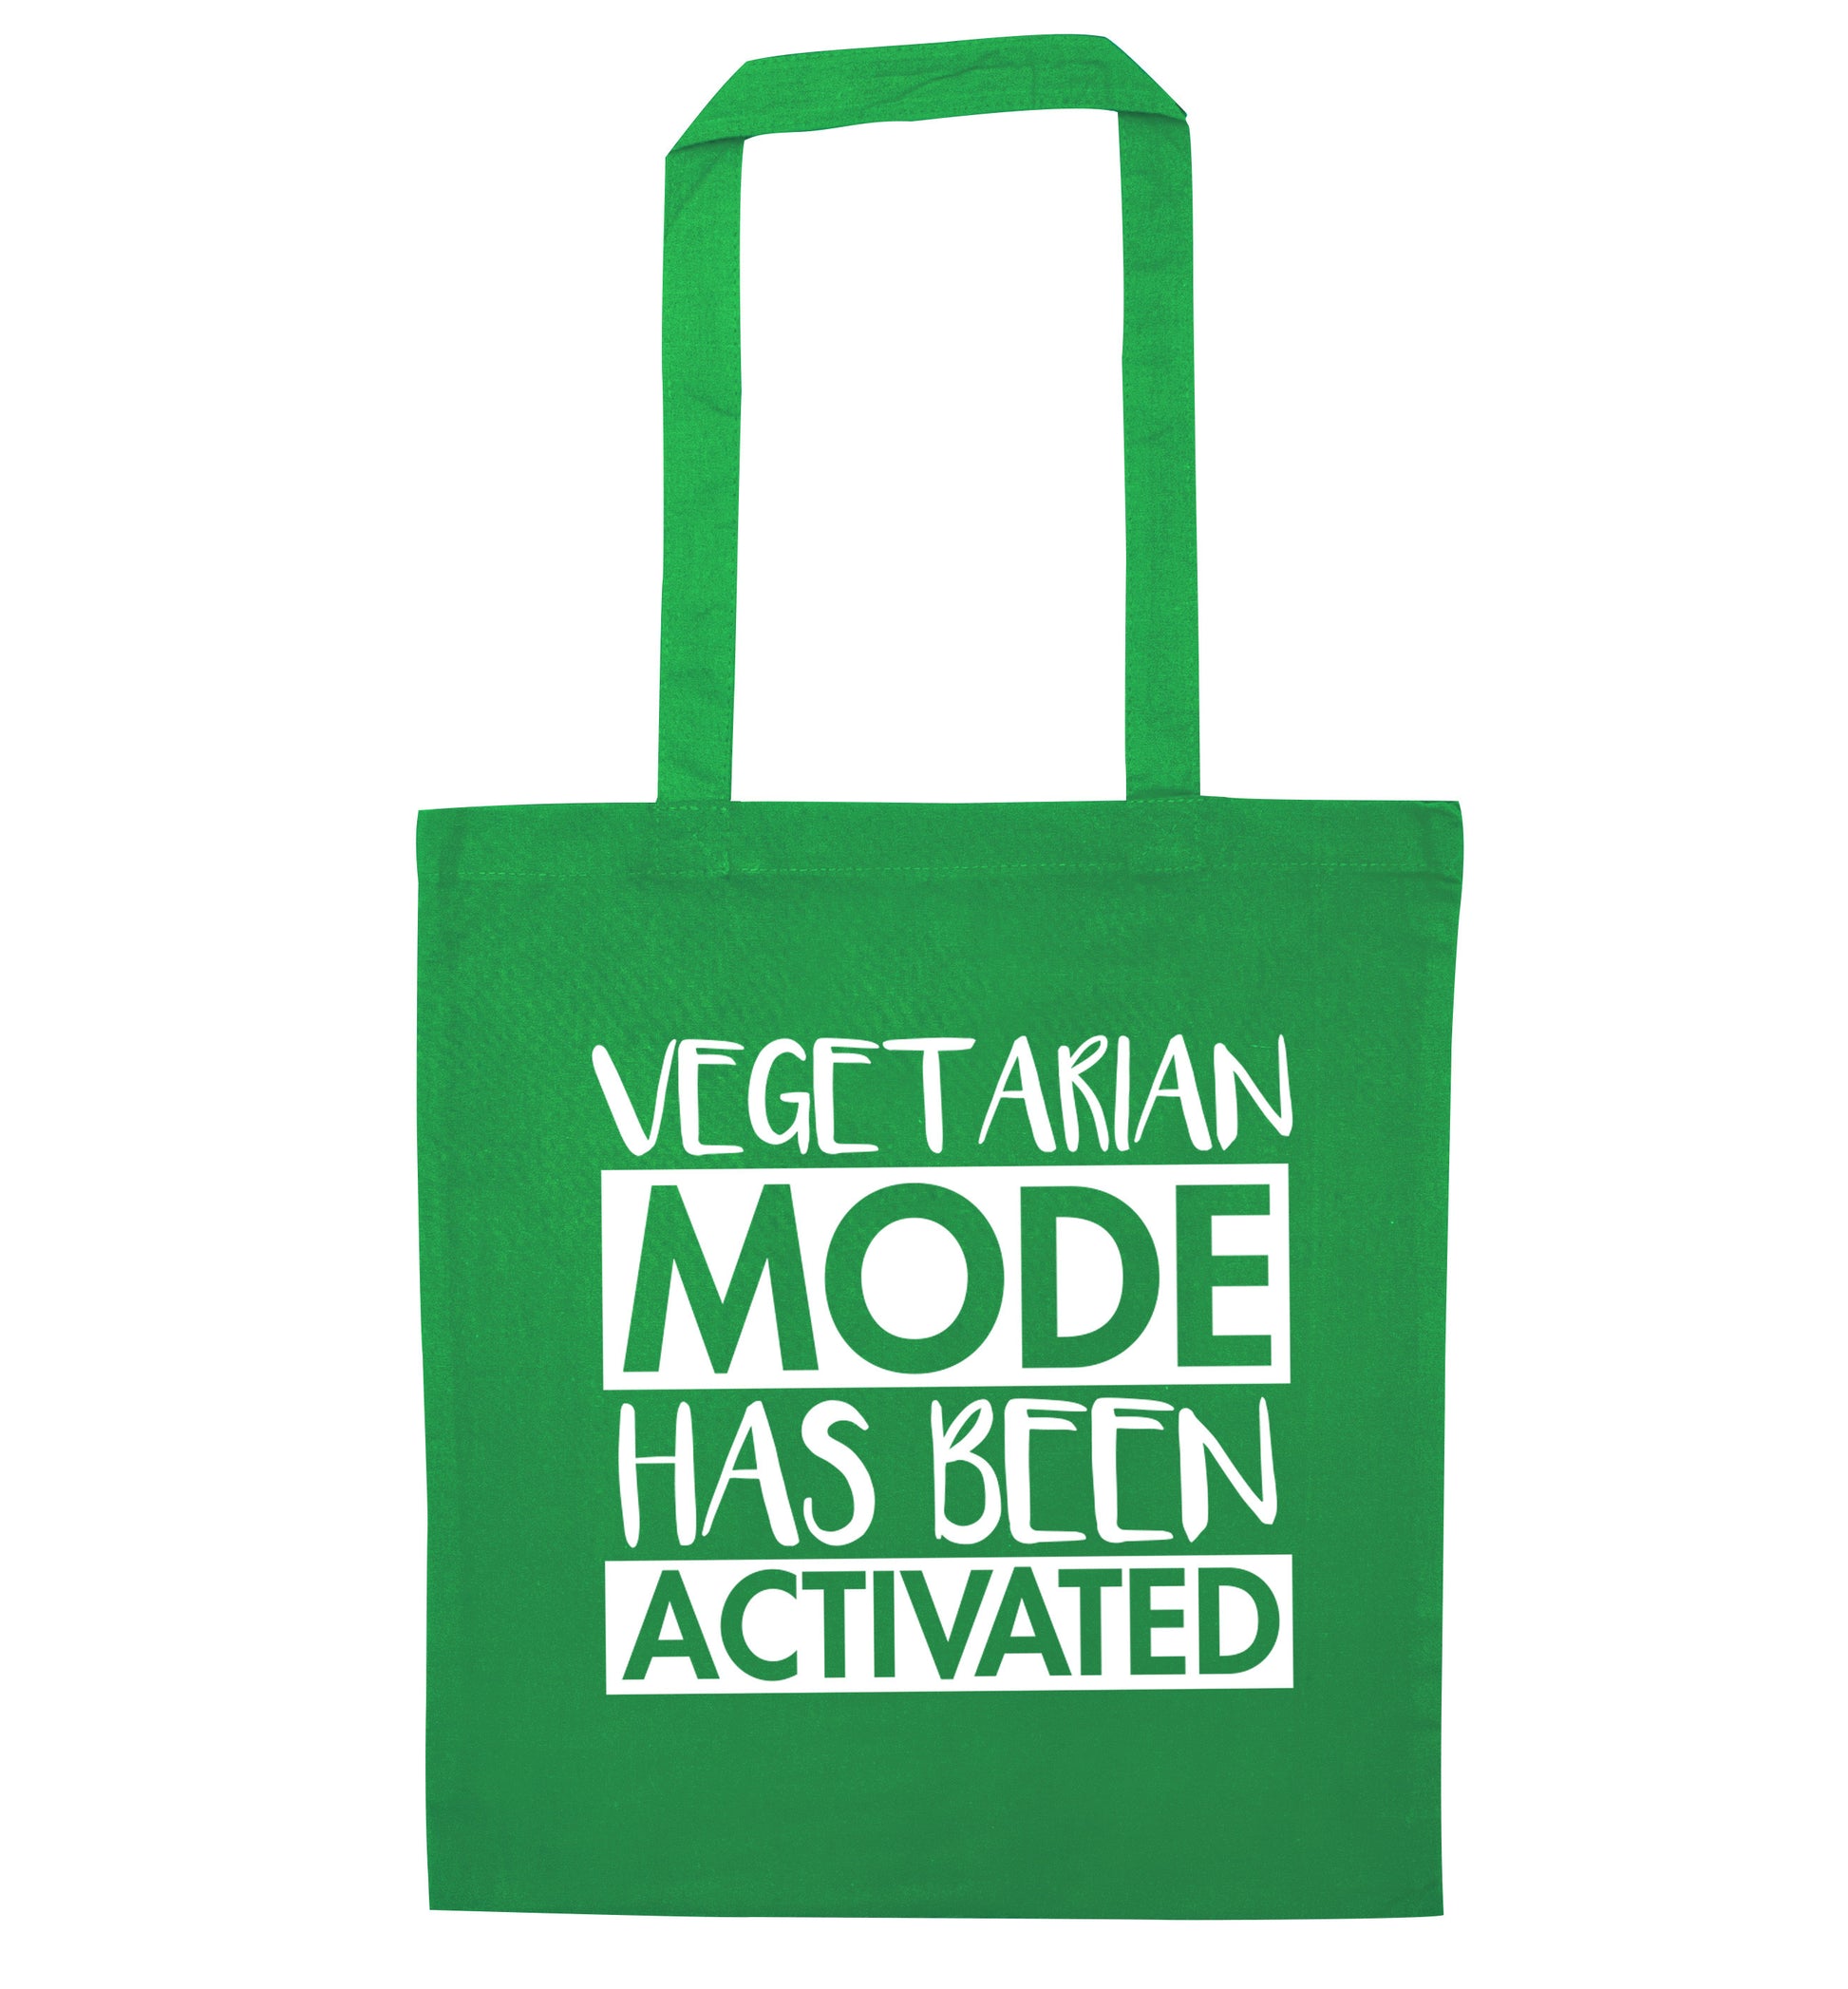 Vegetarian mode activated green tote bag